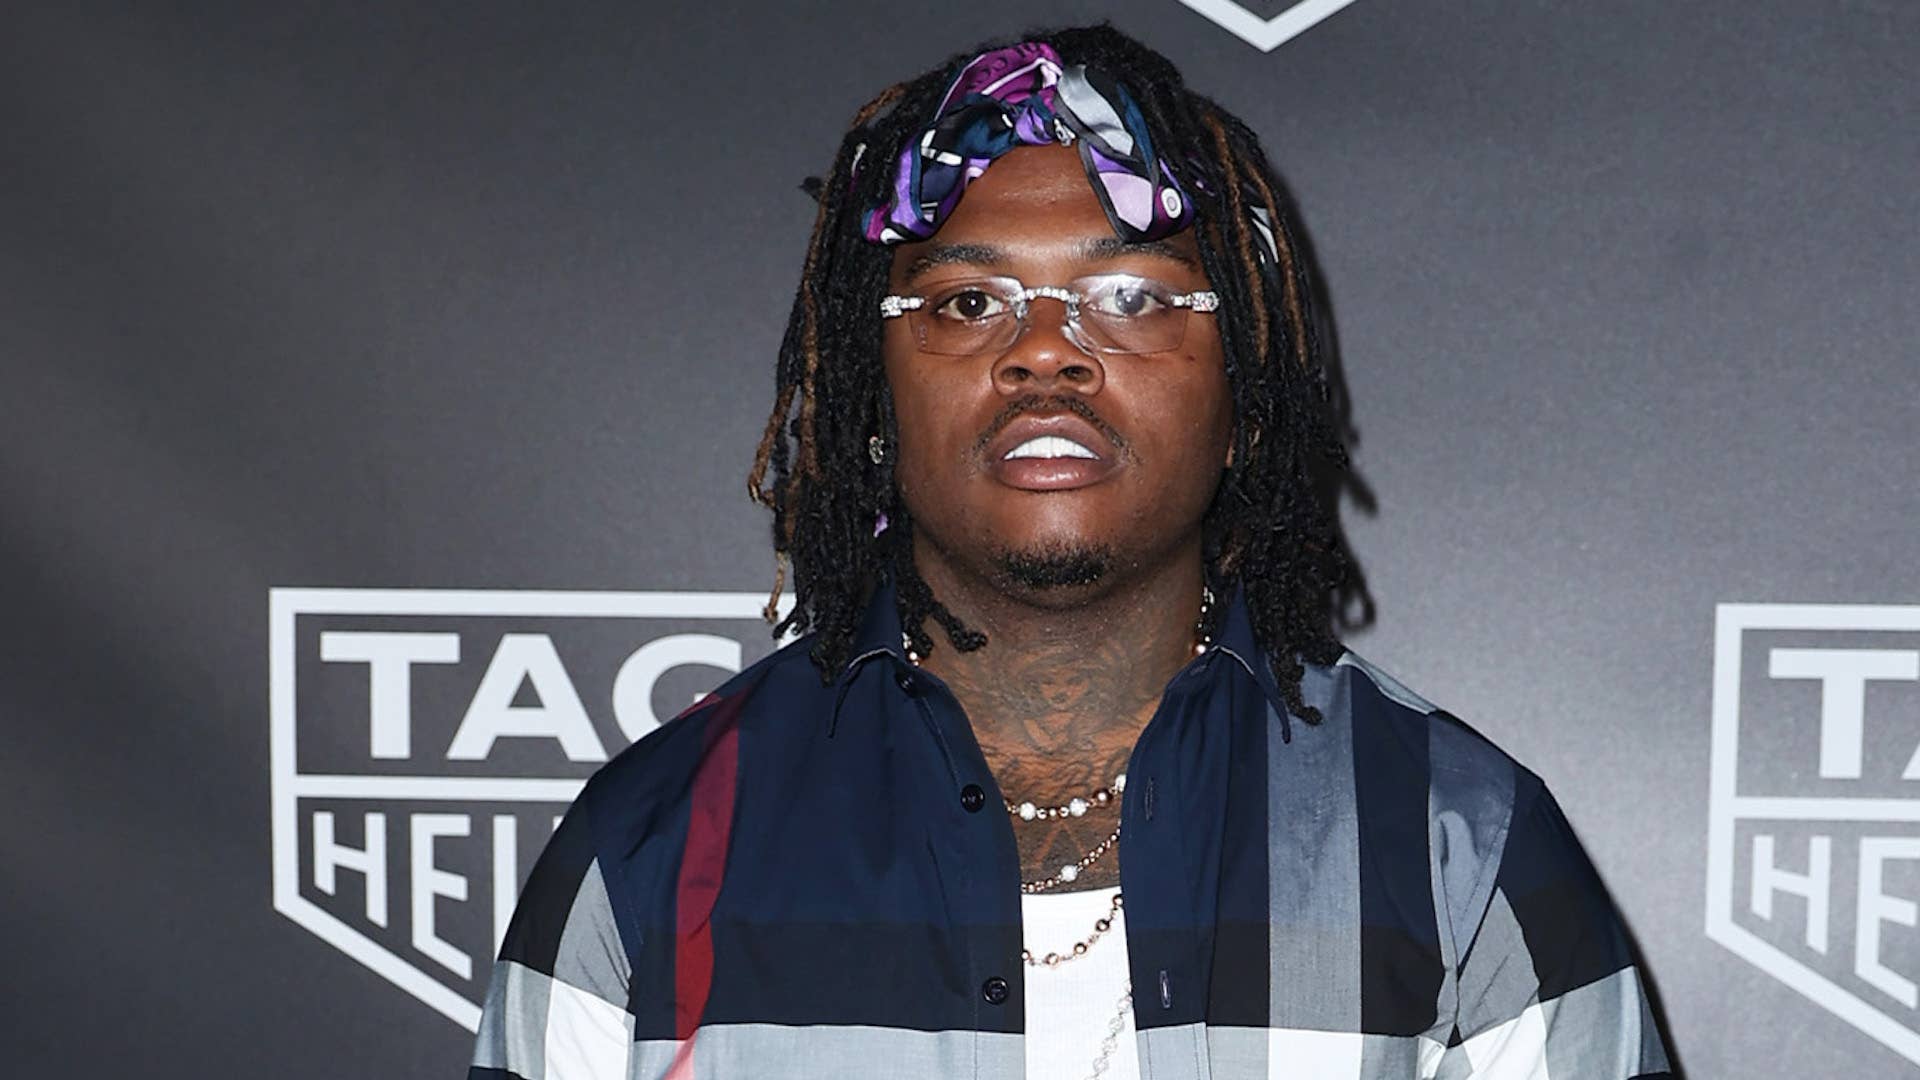 Gunna attempts to get bond for a third time after being denied